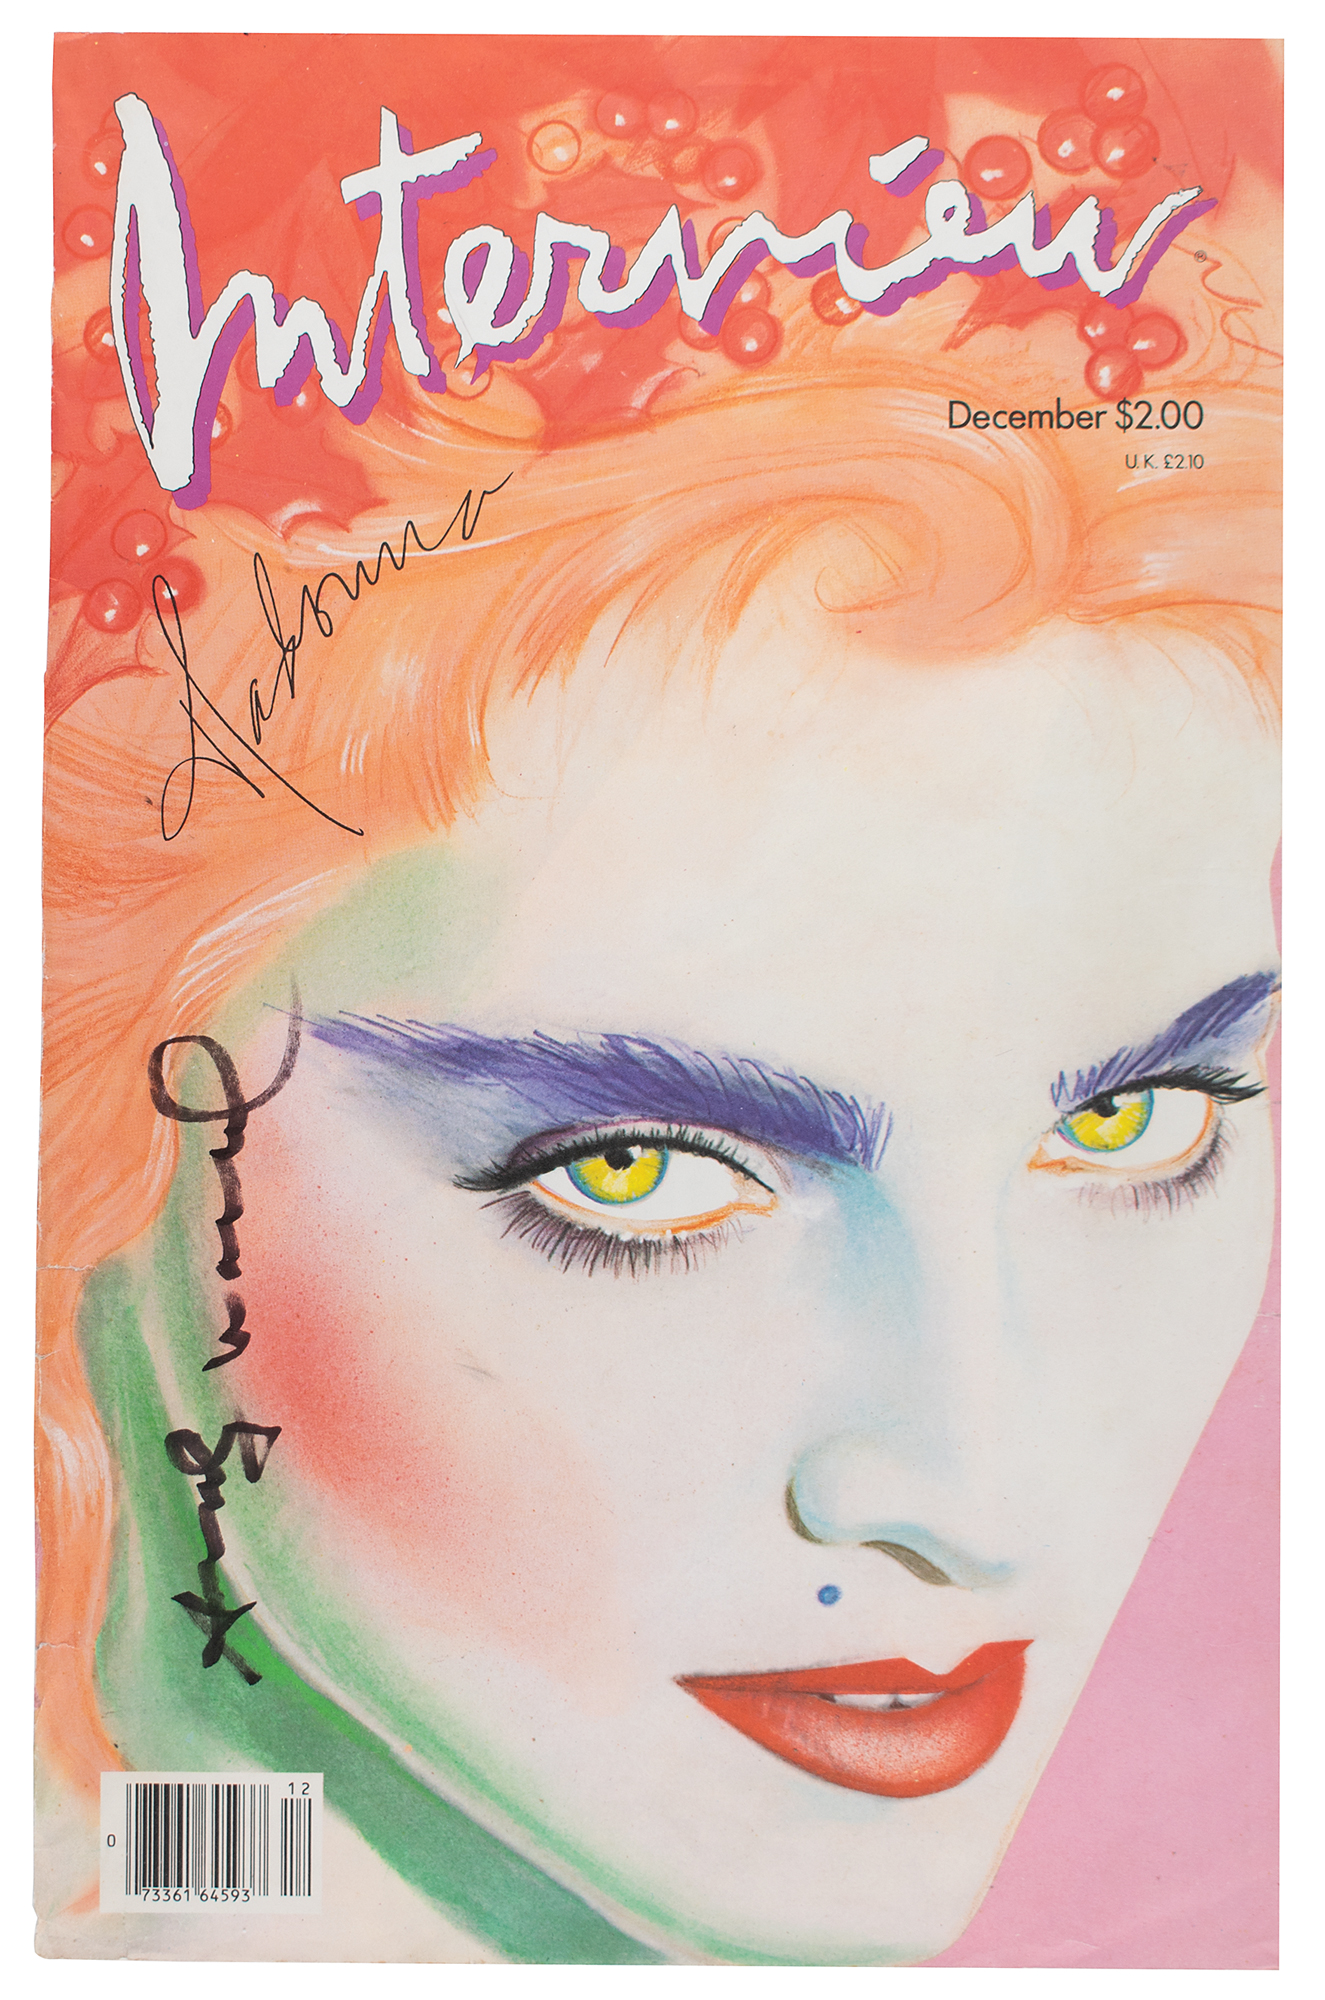 Lot #504 Andy Warhol Signed Magazine Cover